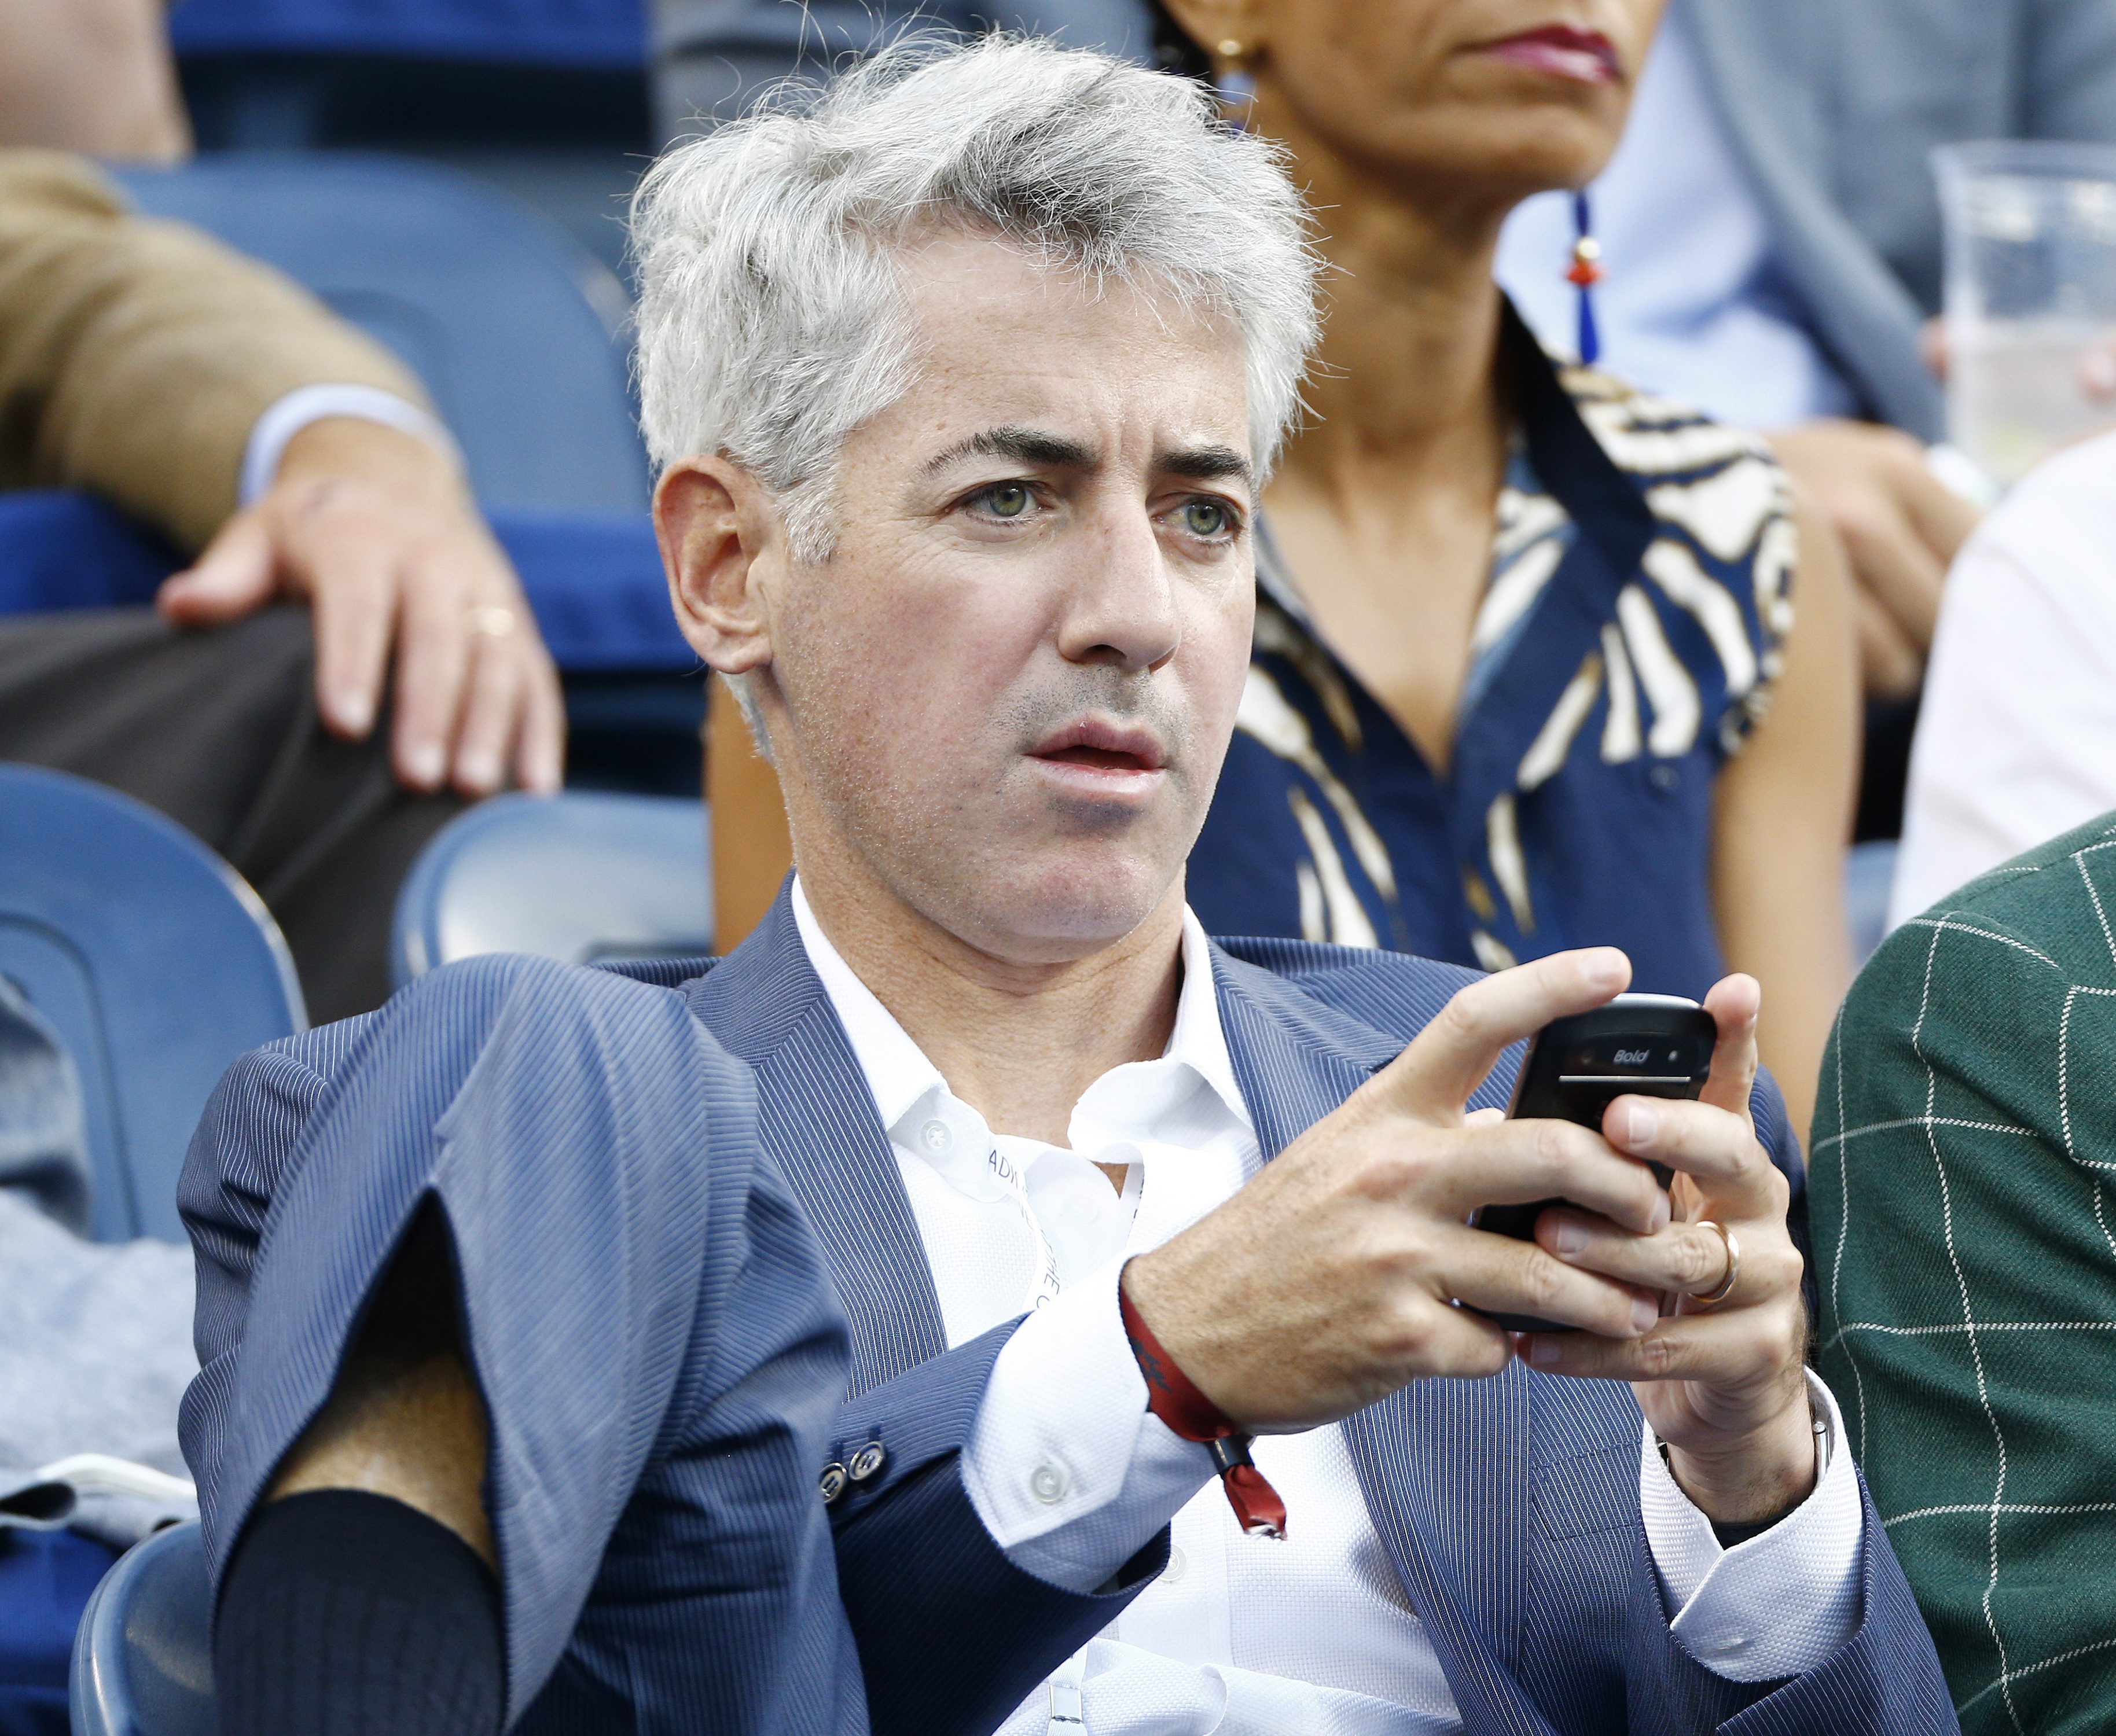 2014-09-03 16:10:30 epa04383090 Pershing Square Capital Management CEO Bill Ackman watches as Stan Wawrinka of Switzerland plays Kei Nishikori of Japan during their quarterfinals round match on the tenth day of the 2014 US Open Tennis Championship at the USTA National Tennis Center in Flushing Meadows, New York, USA, 03 September 2014. The US Open runs through 08 September, a 15-day schedule. EPA/ANDREW GOMBERT